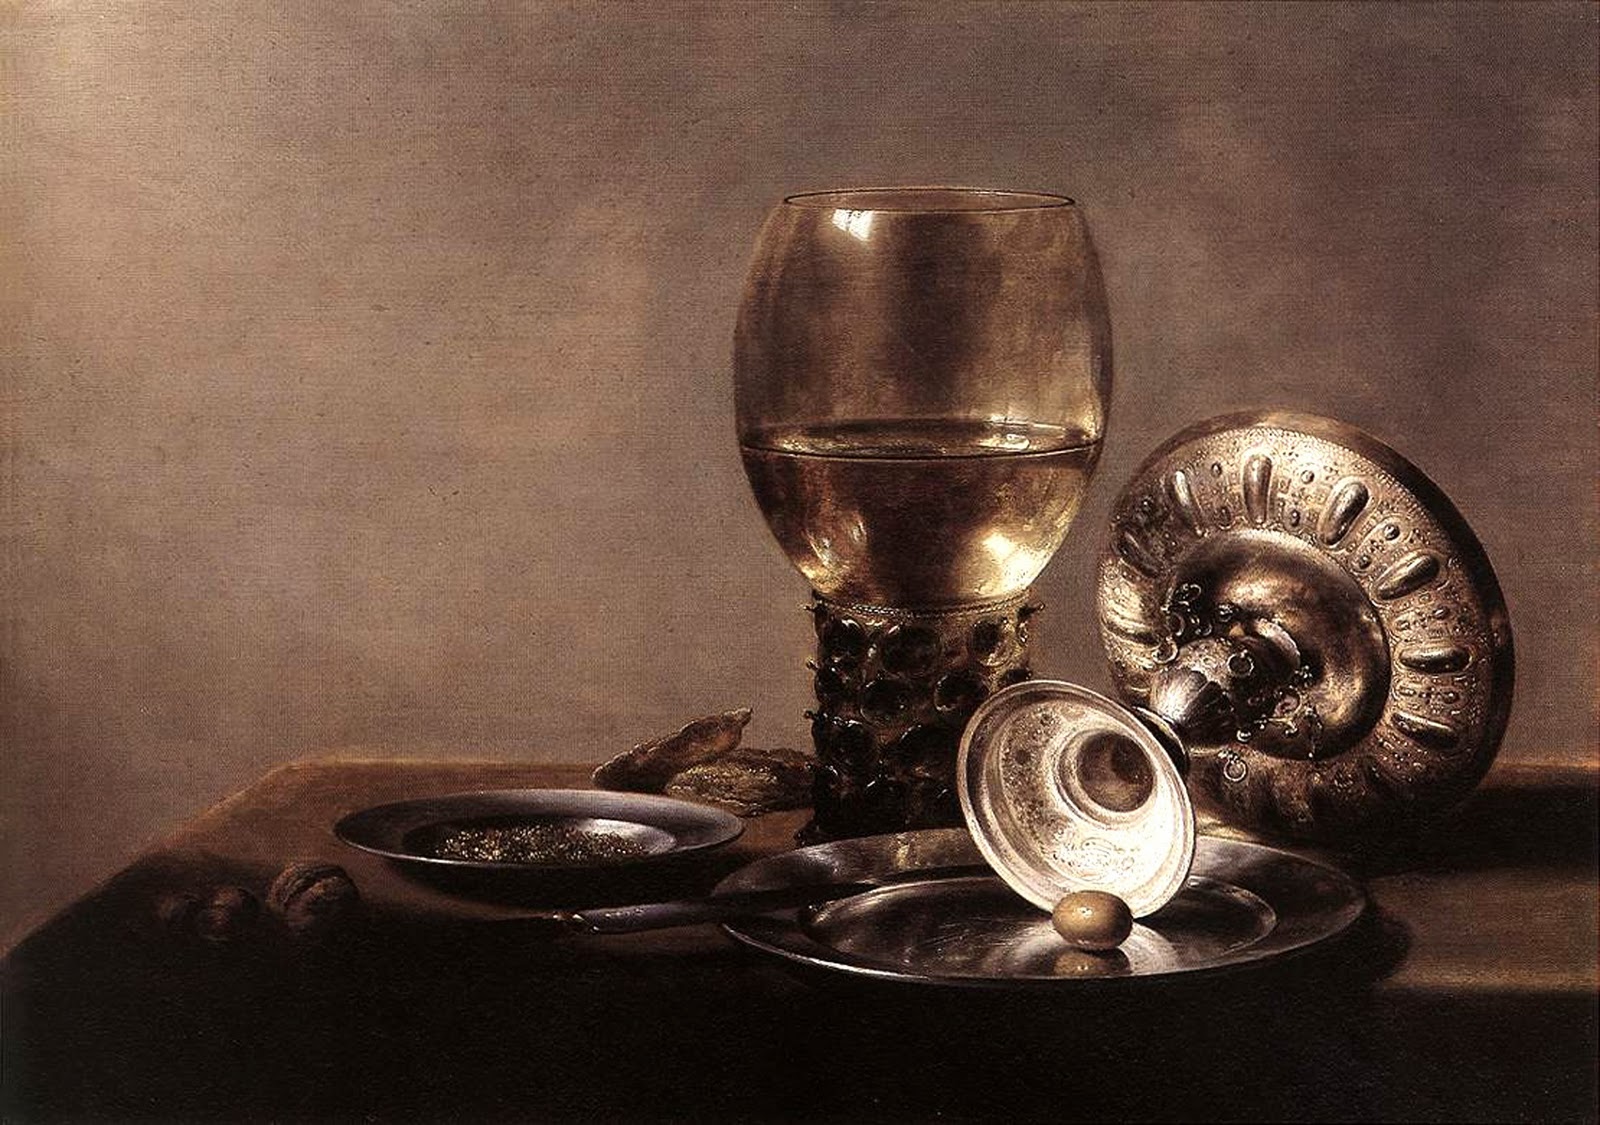 [Pieter%2520Claesz_Still-life-with-Wine-Glass-and-Silver-Bowl%255B6%255D.jpg]